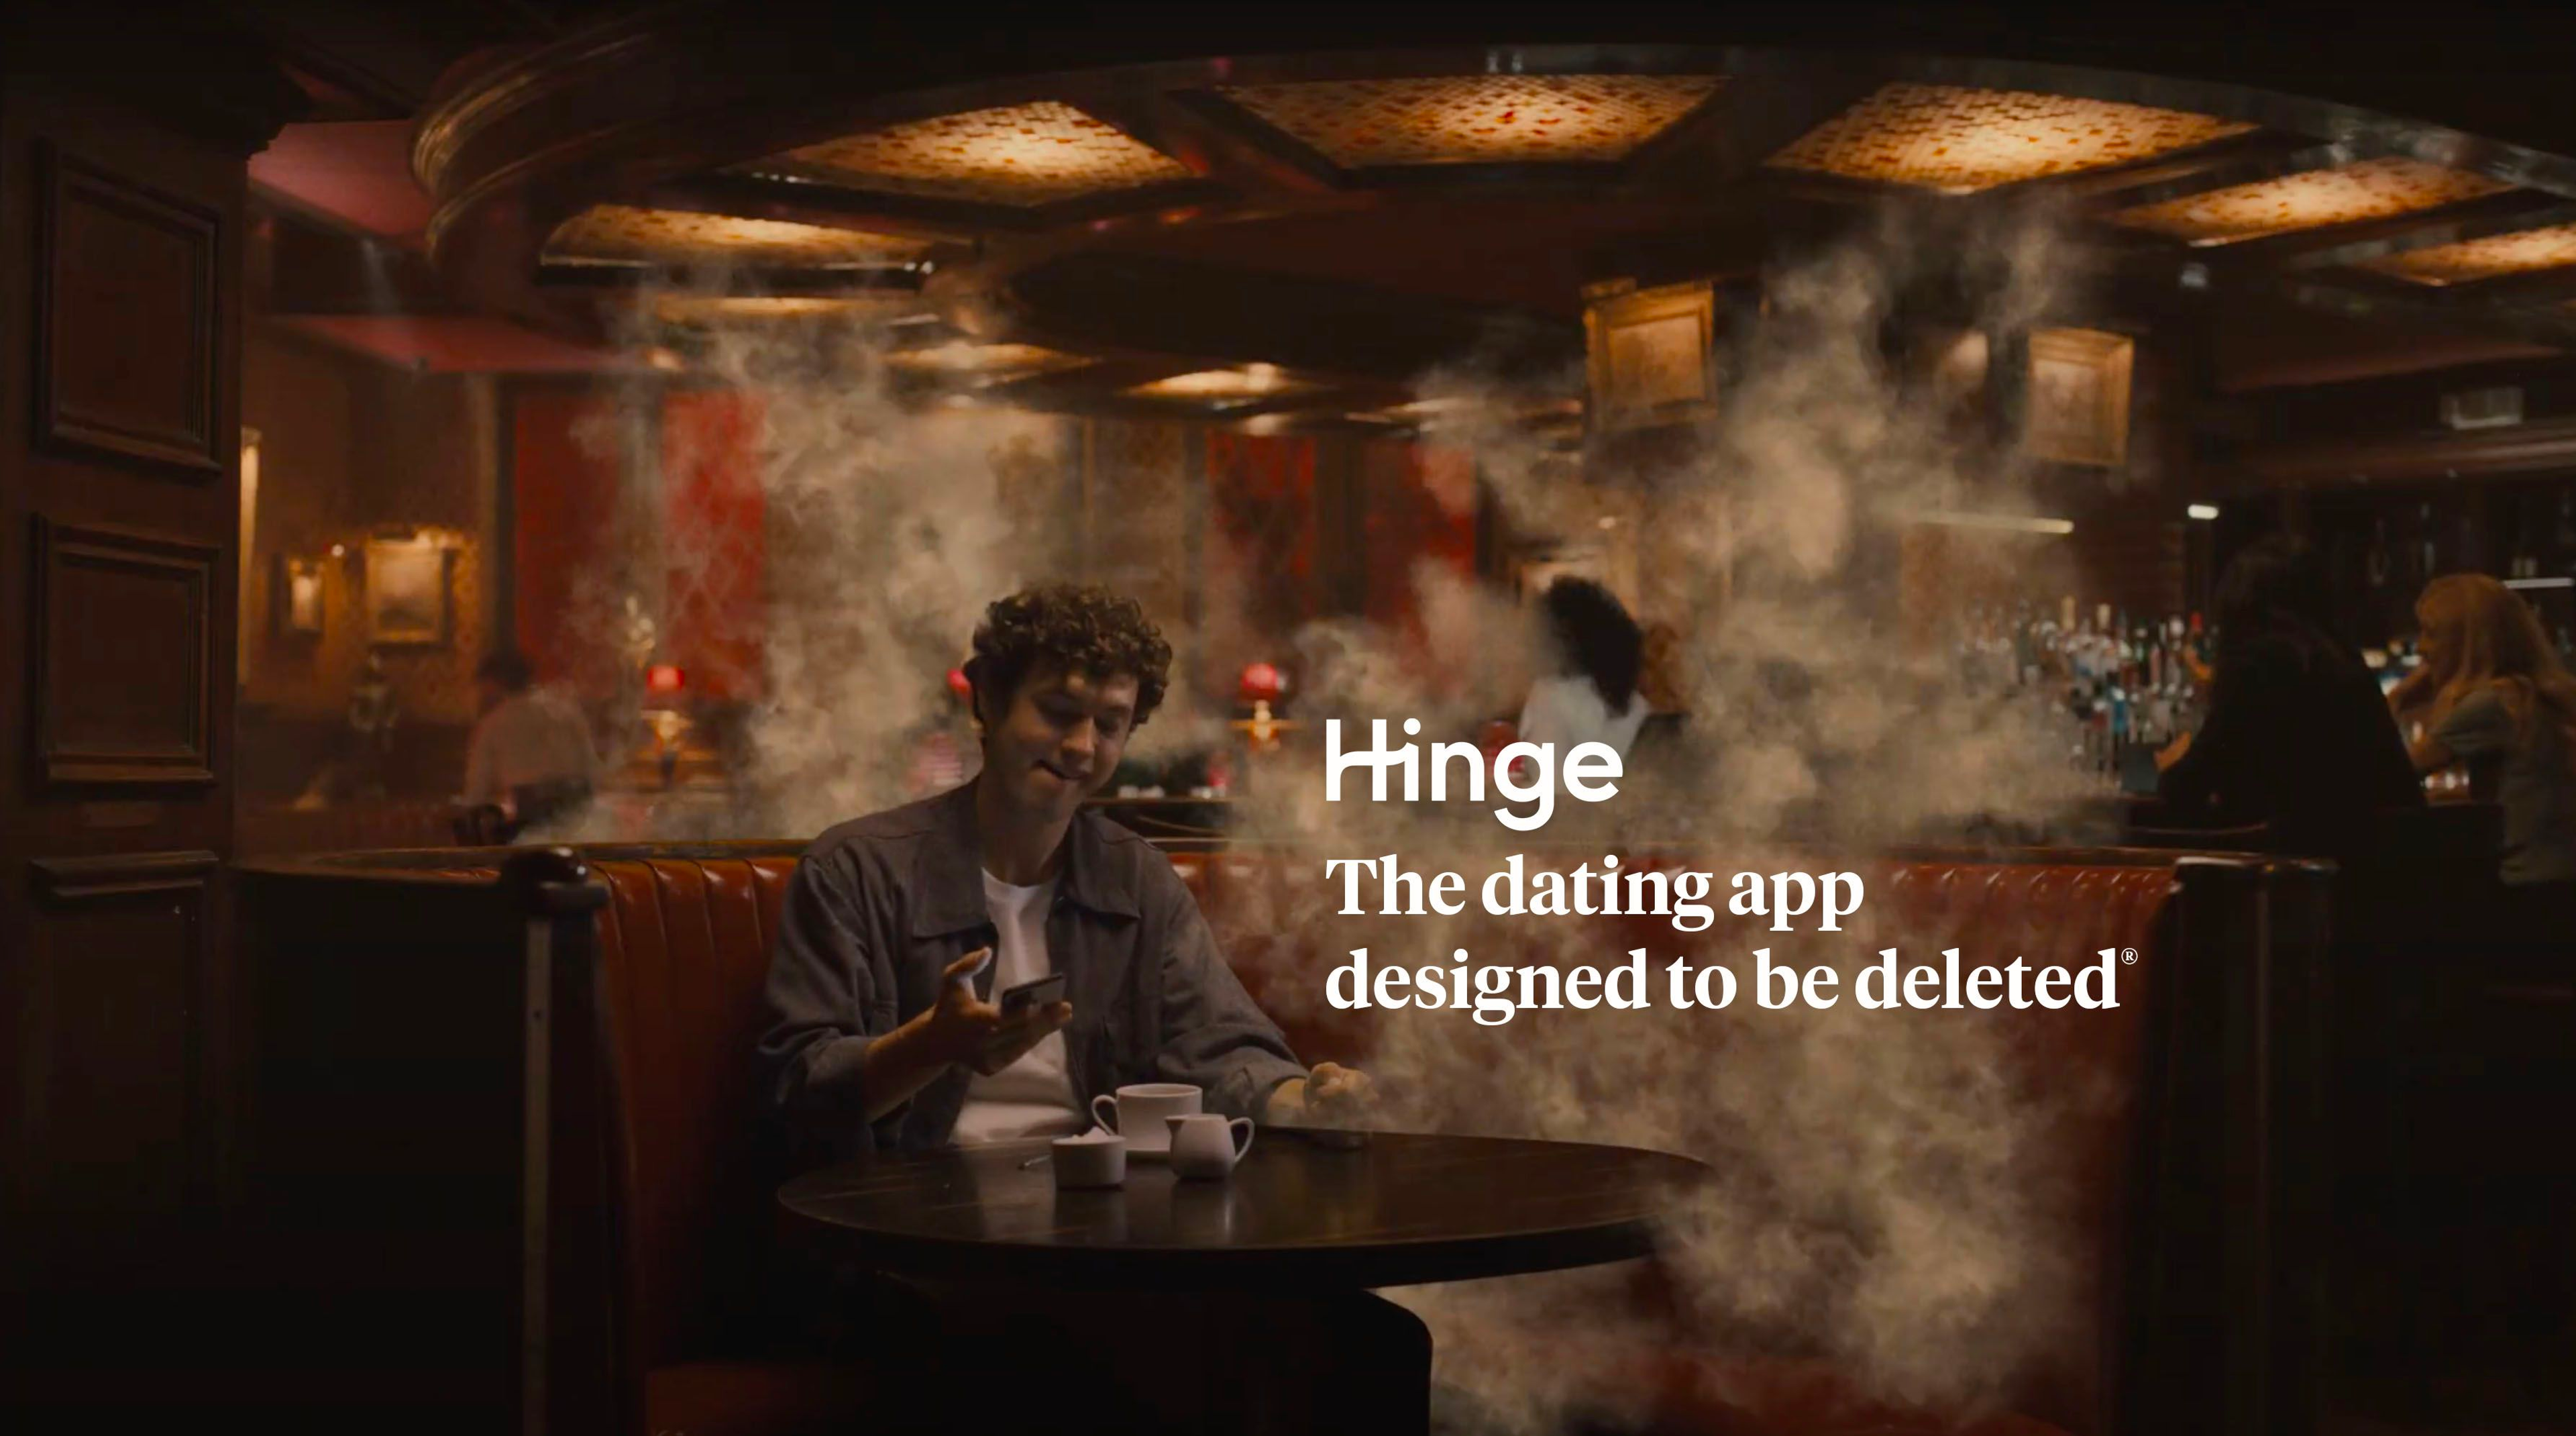 The dating app designed to be deleted